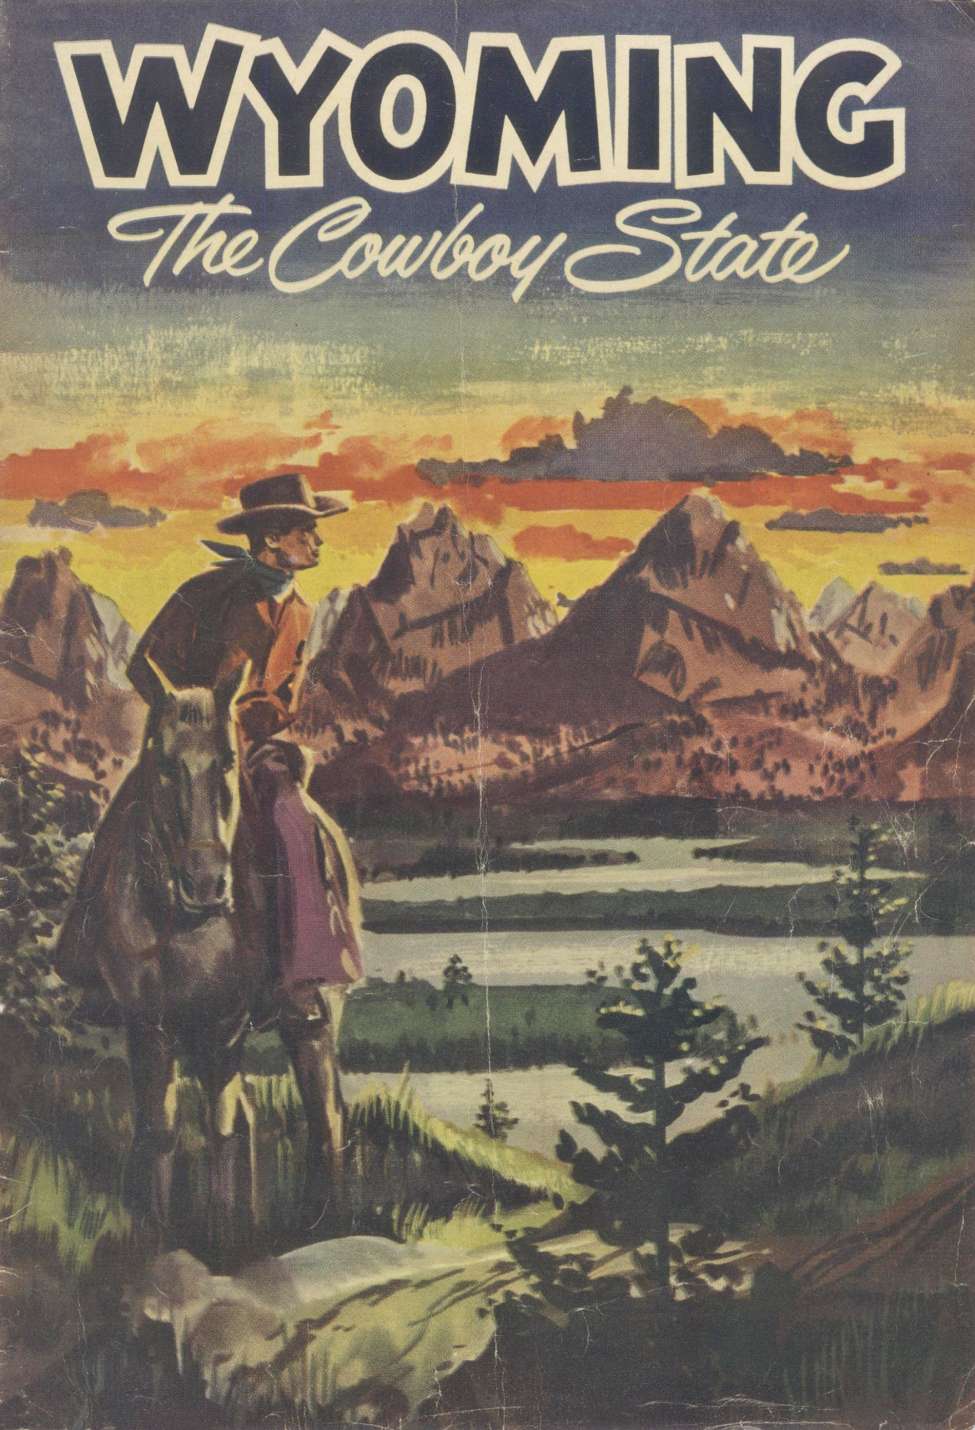 Comic Book Cover For Wyoming The Cowboy State (A)